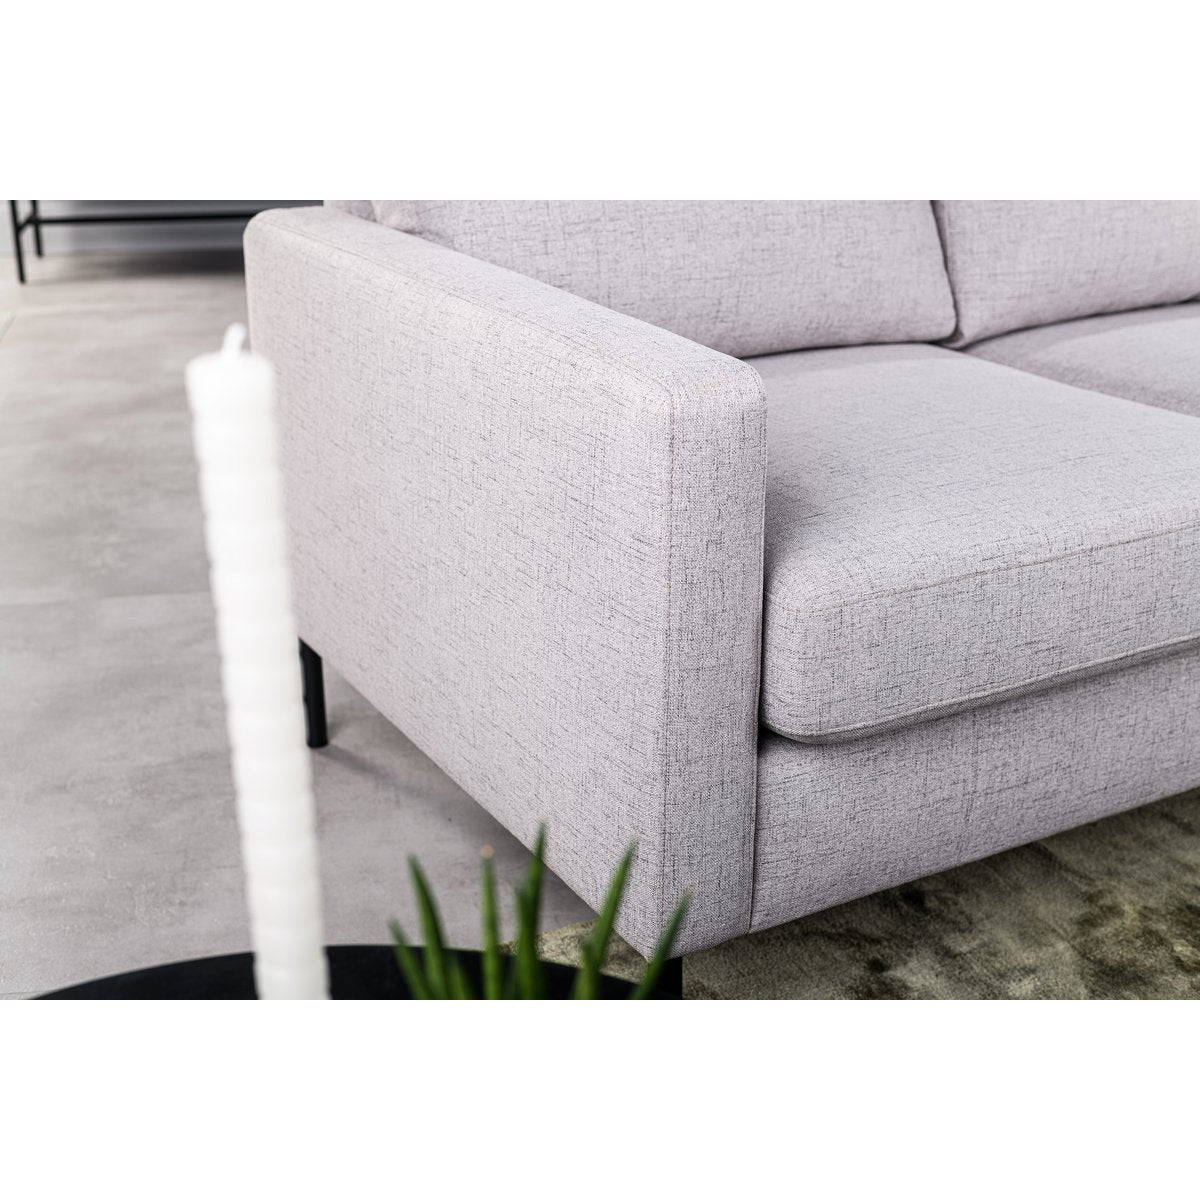 3 seater sofa CL L+R, with headrest, fabric Valente, V311 gray